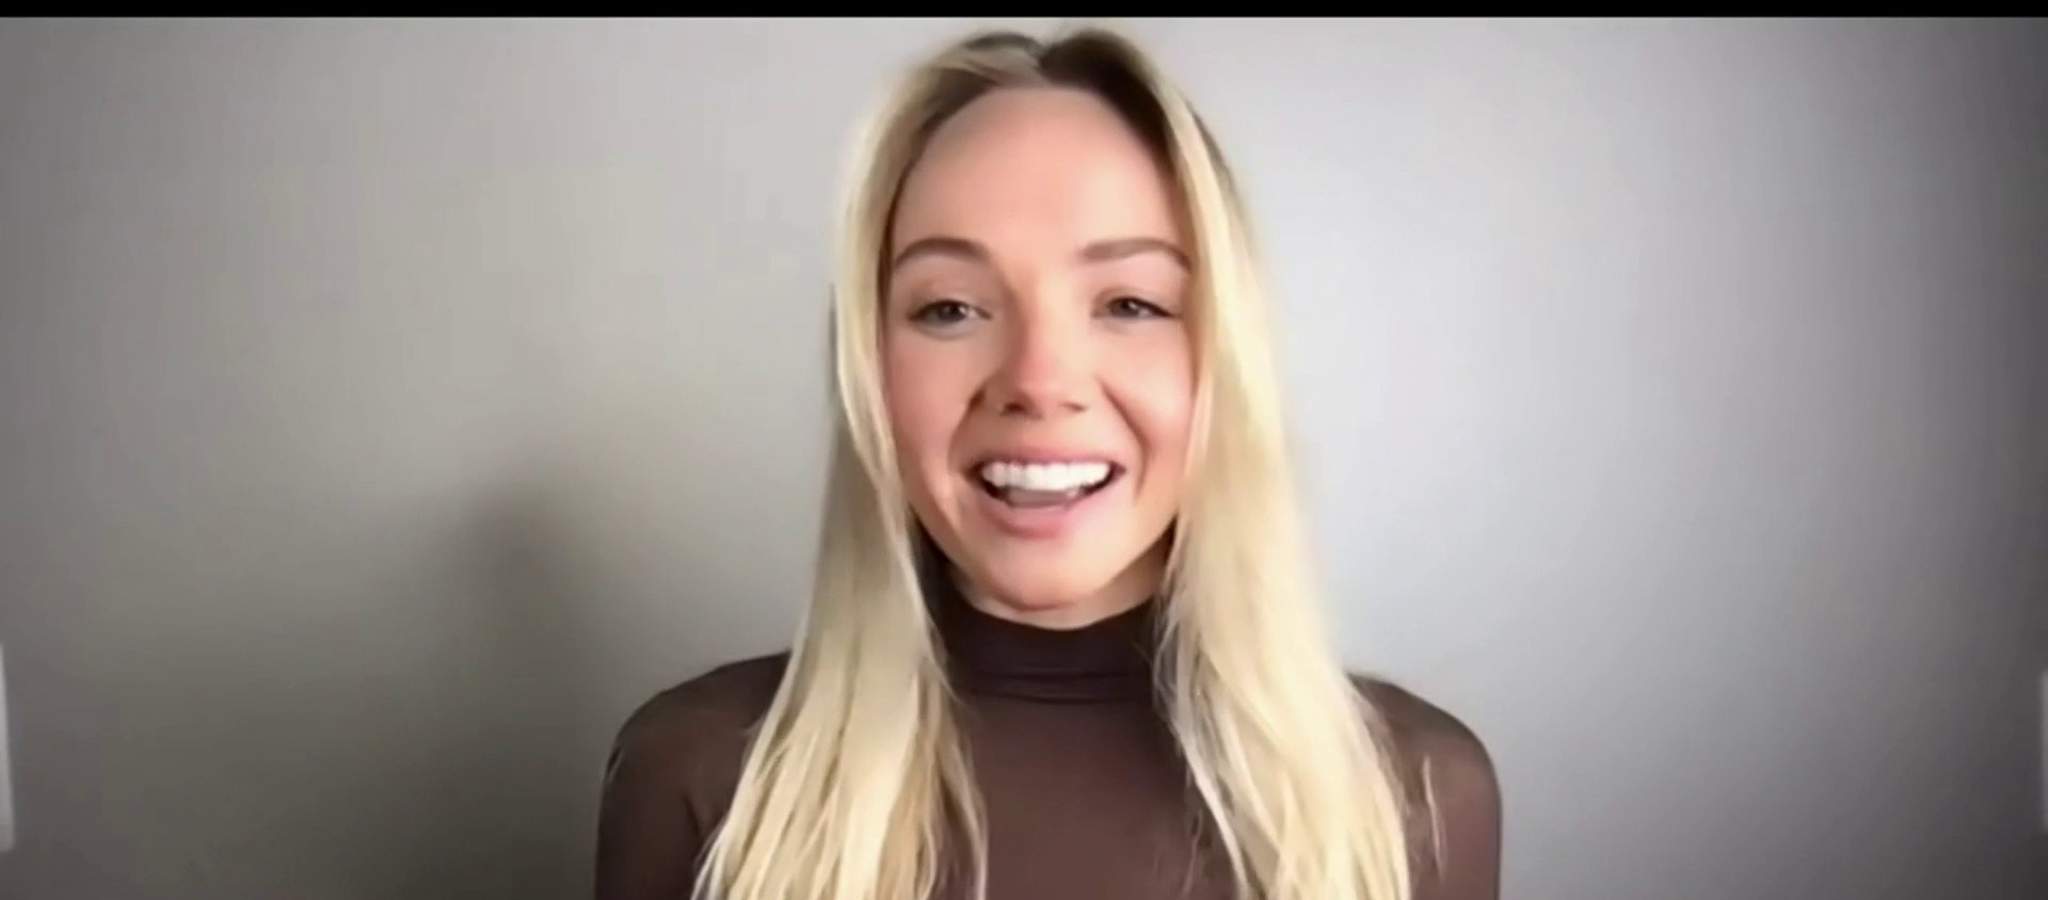 How Cypress singer Danielle Bradbery found success after ‘The Voice’